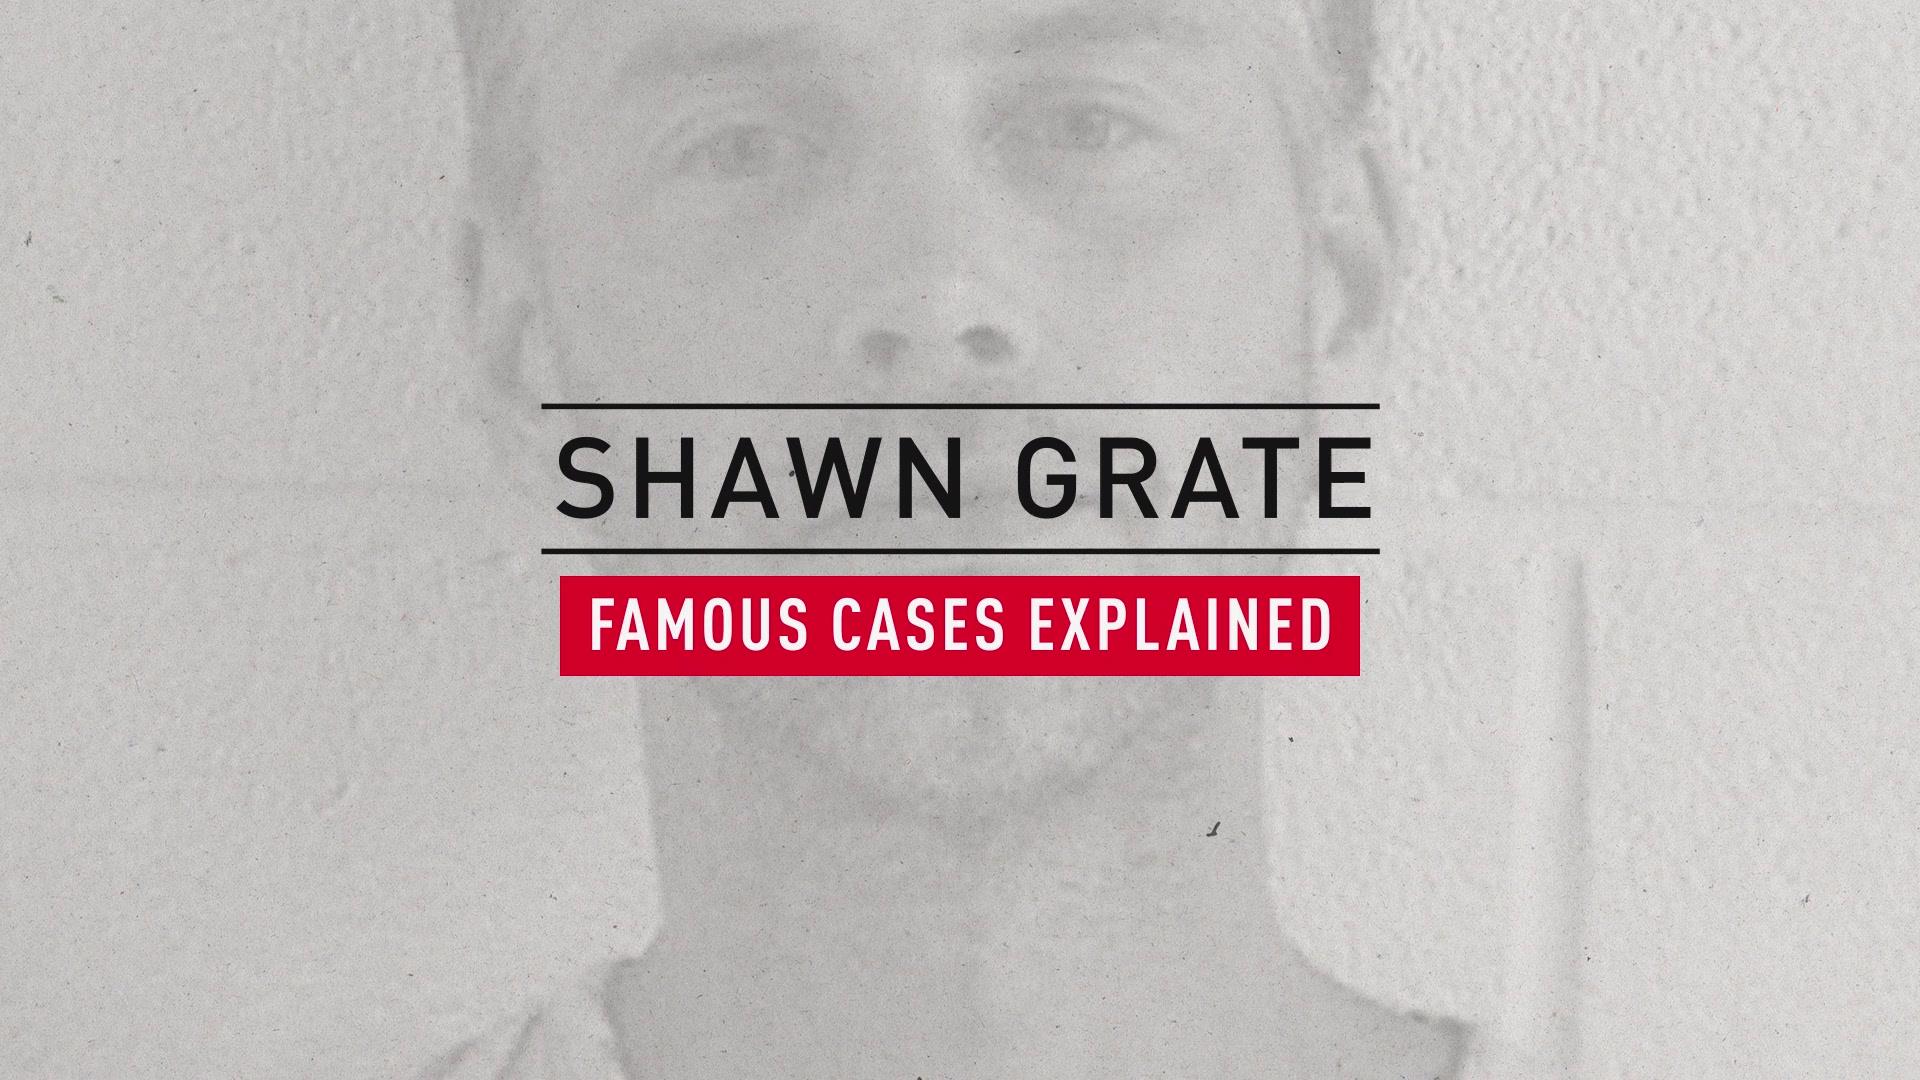 The Shawn Grate Case, Explained